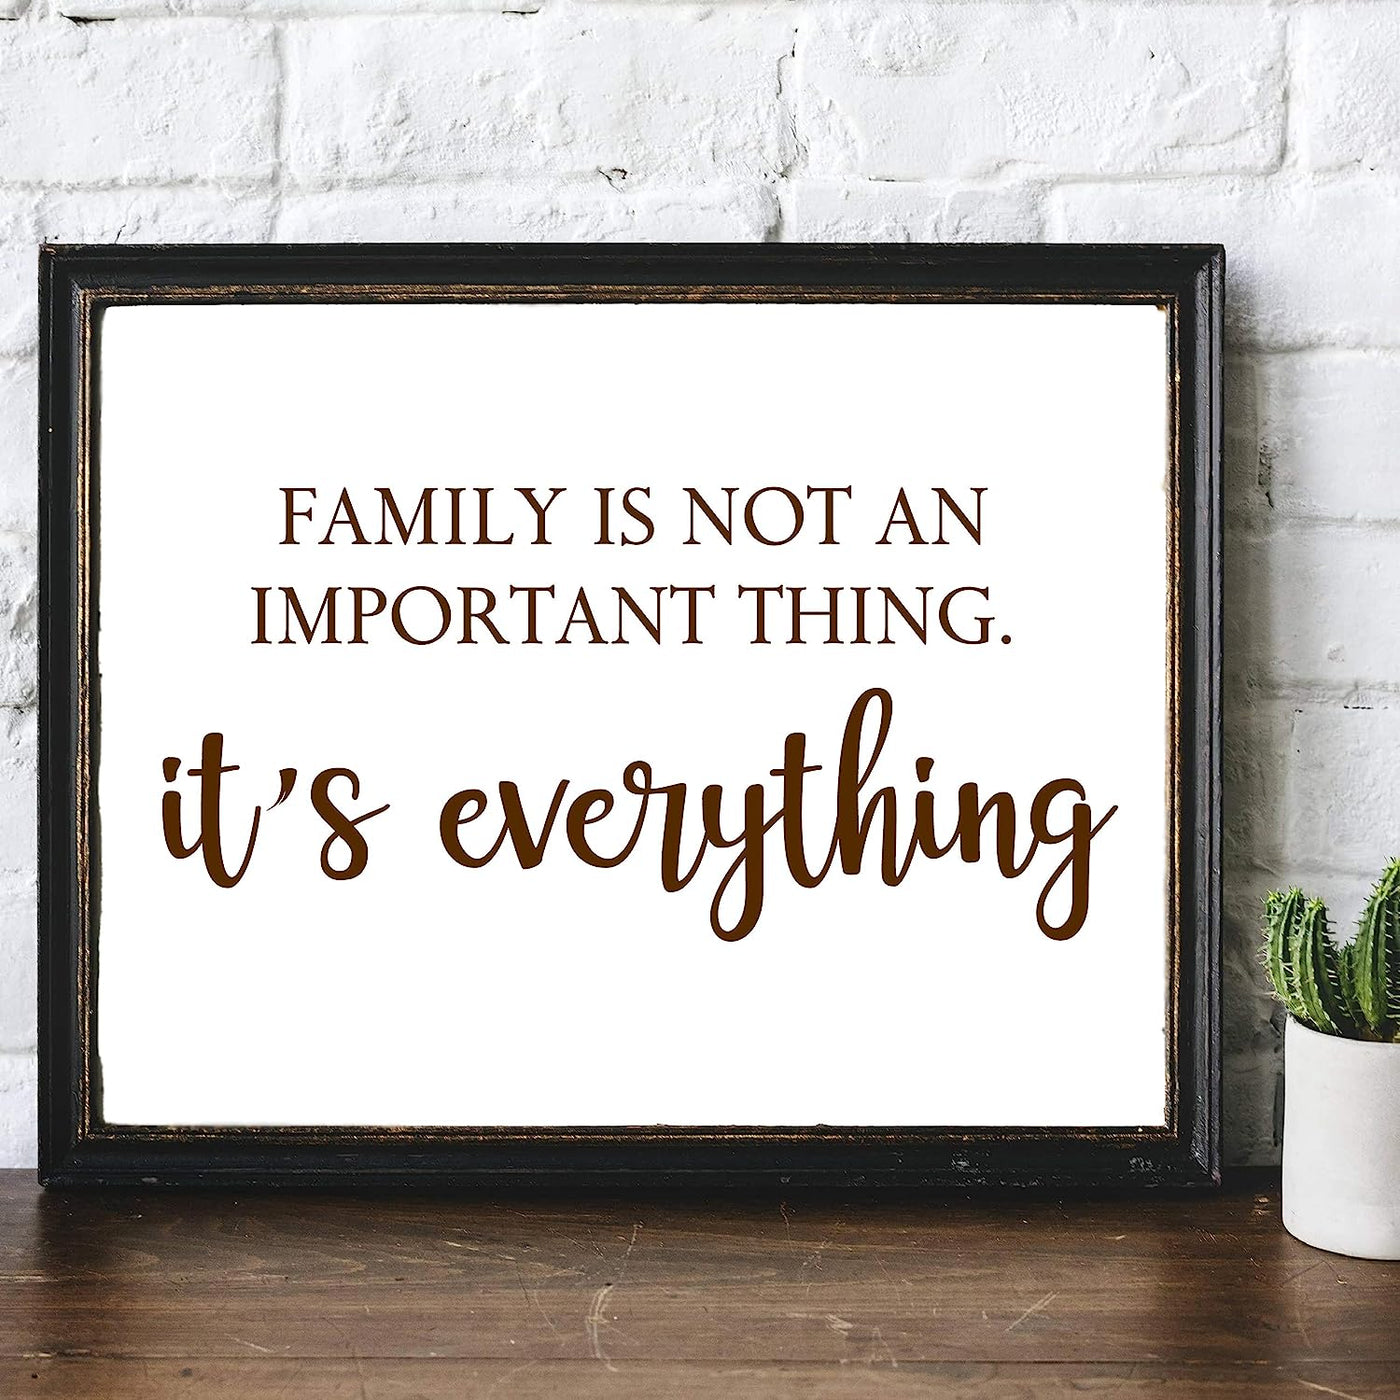 Family Is Not an Important Thing, It's Everything Inspirational Family Wall Sign -14 x 11" Typographic Art Print-Ready to Frame. Home-Entryway-Porch Decor. Perfect Welcome Sign-Housewarming Gift!